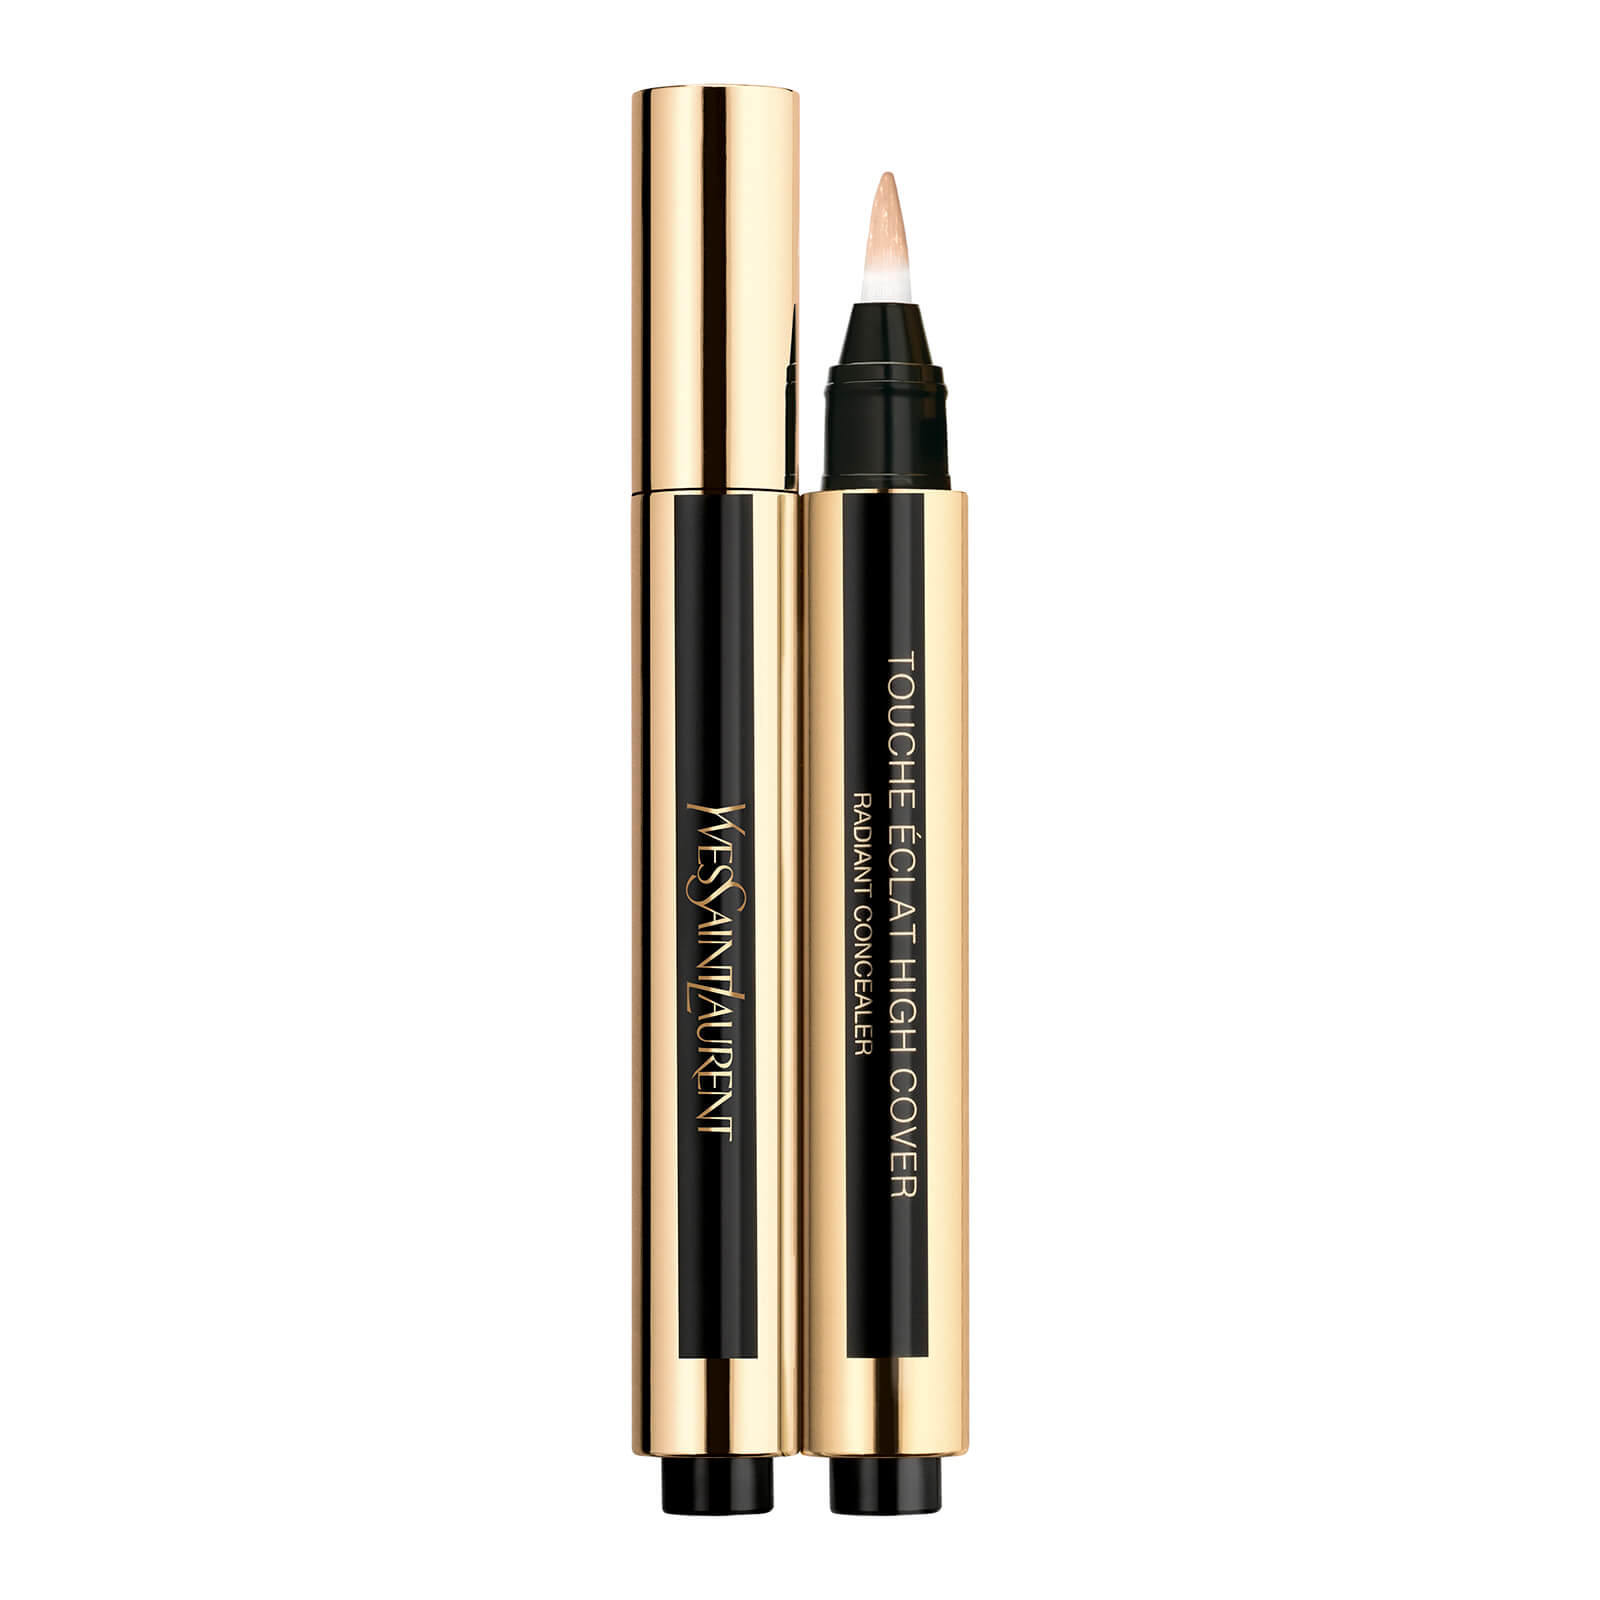 Yves Saint Laurent Touche Eclat High Cover Concealer 2.5ml (Various Shades) - 2 Ivory